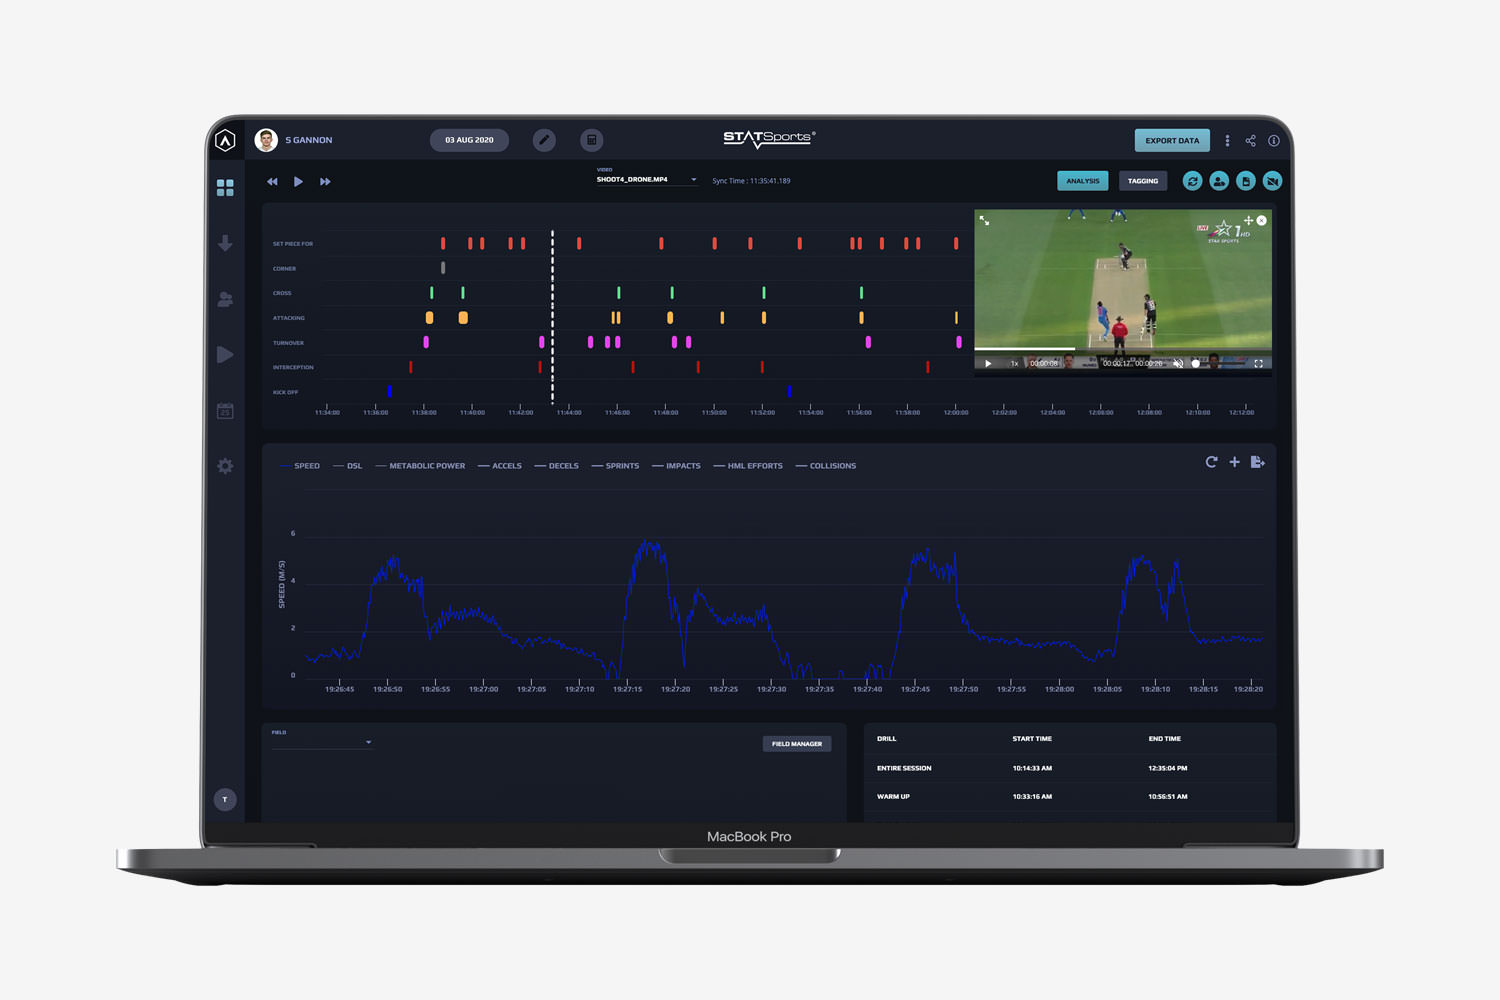 Cricket Video Manager